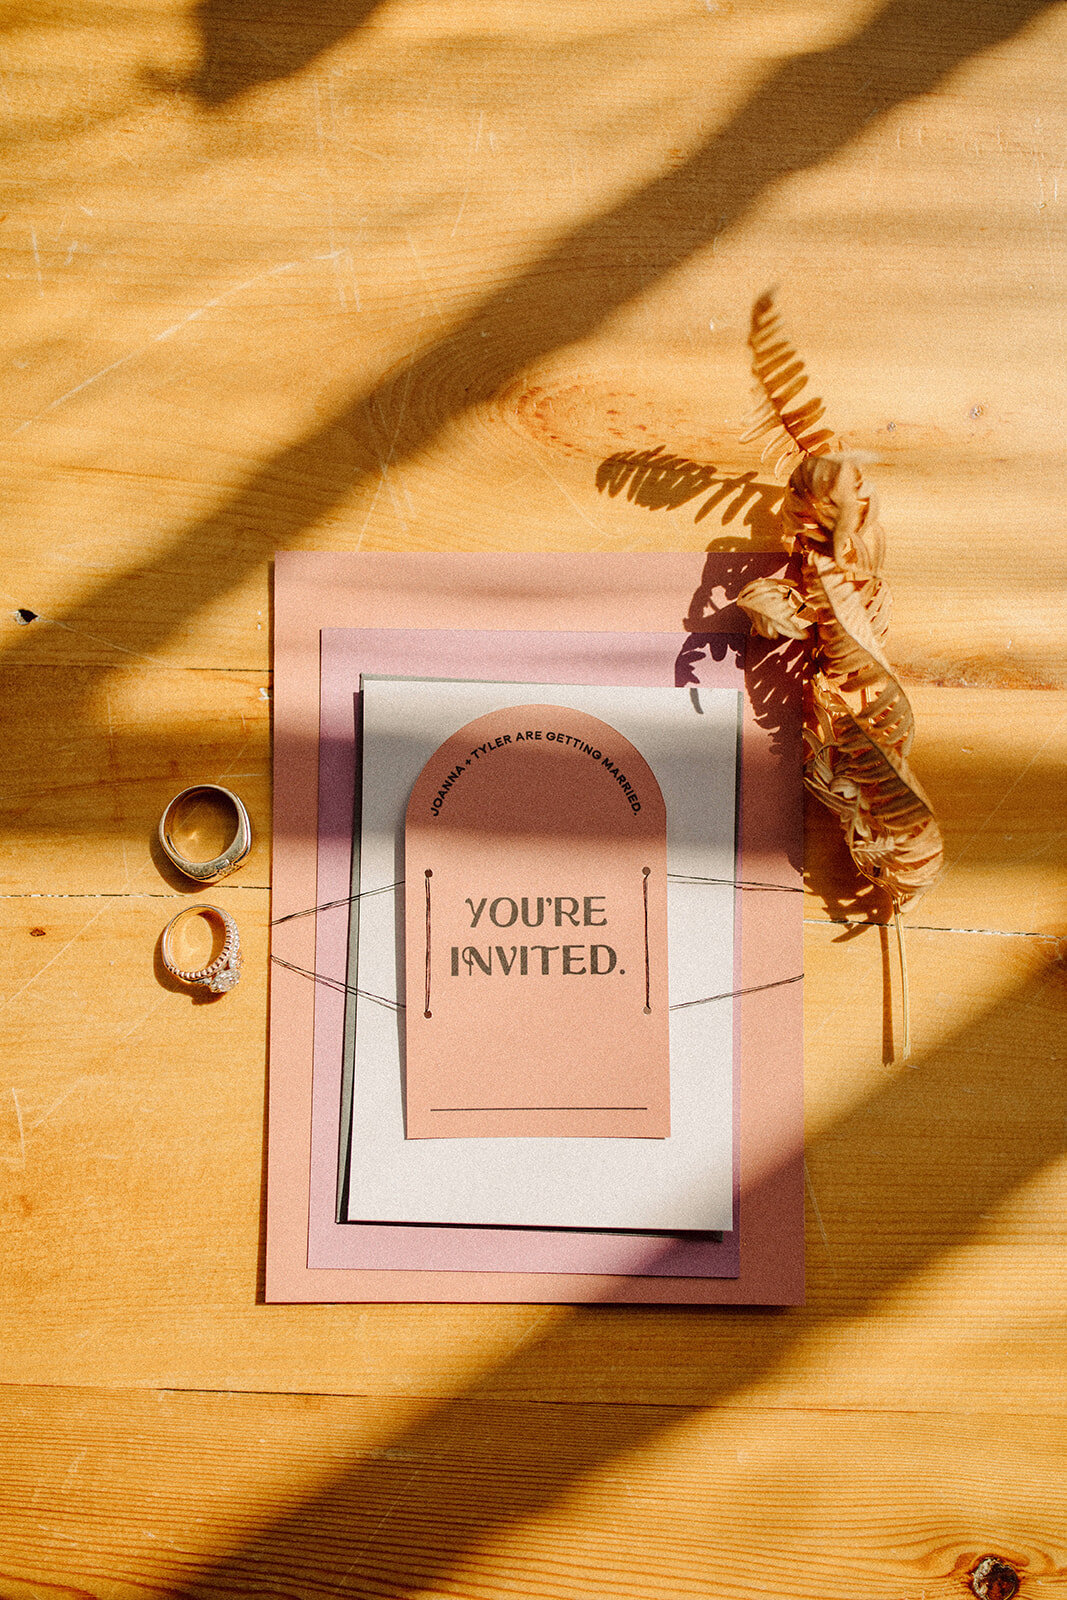 Rounded peach wedding invitation set atop off-white and mauve-colored wedding stationery and wedding bands atop wooden table.